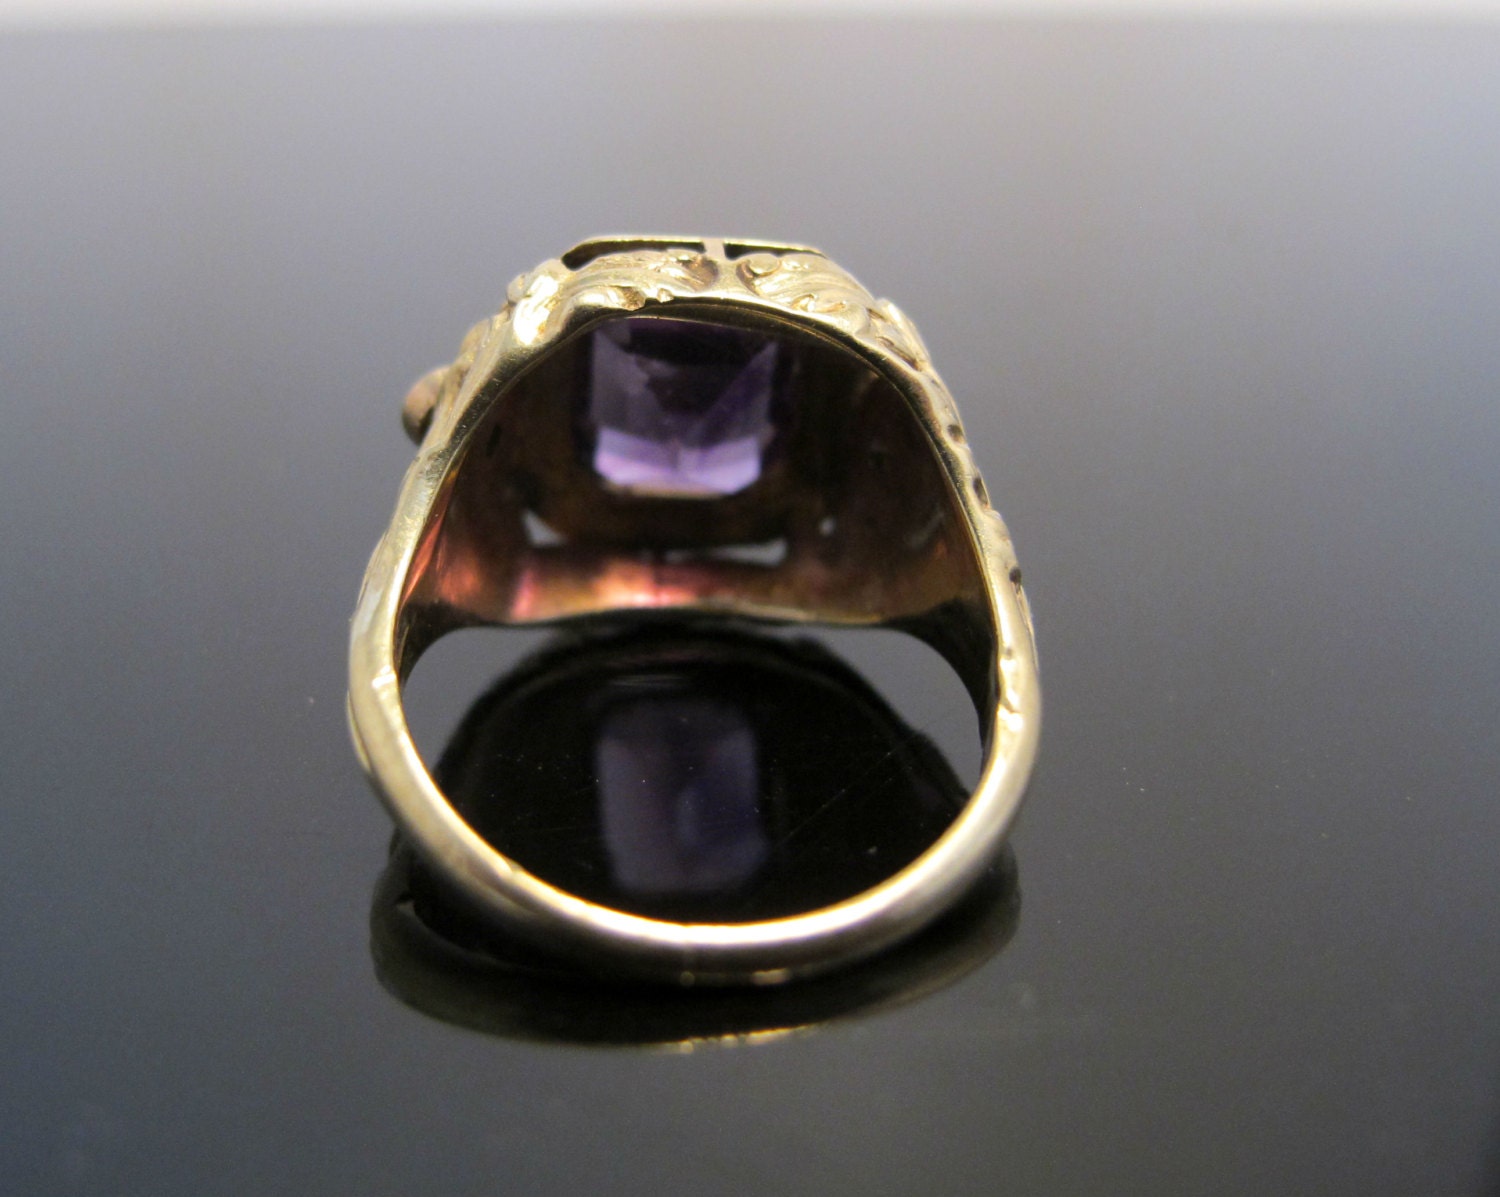 Vintage 10k Gold Filigree Amethyst Ring With Diamond Accents - Etsy